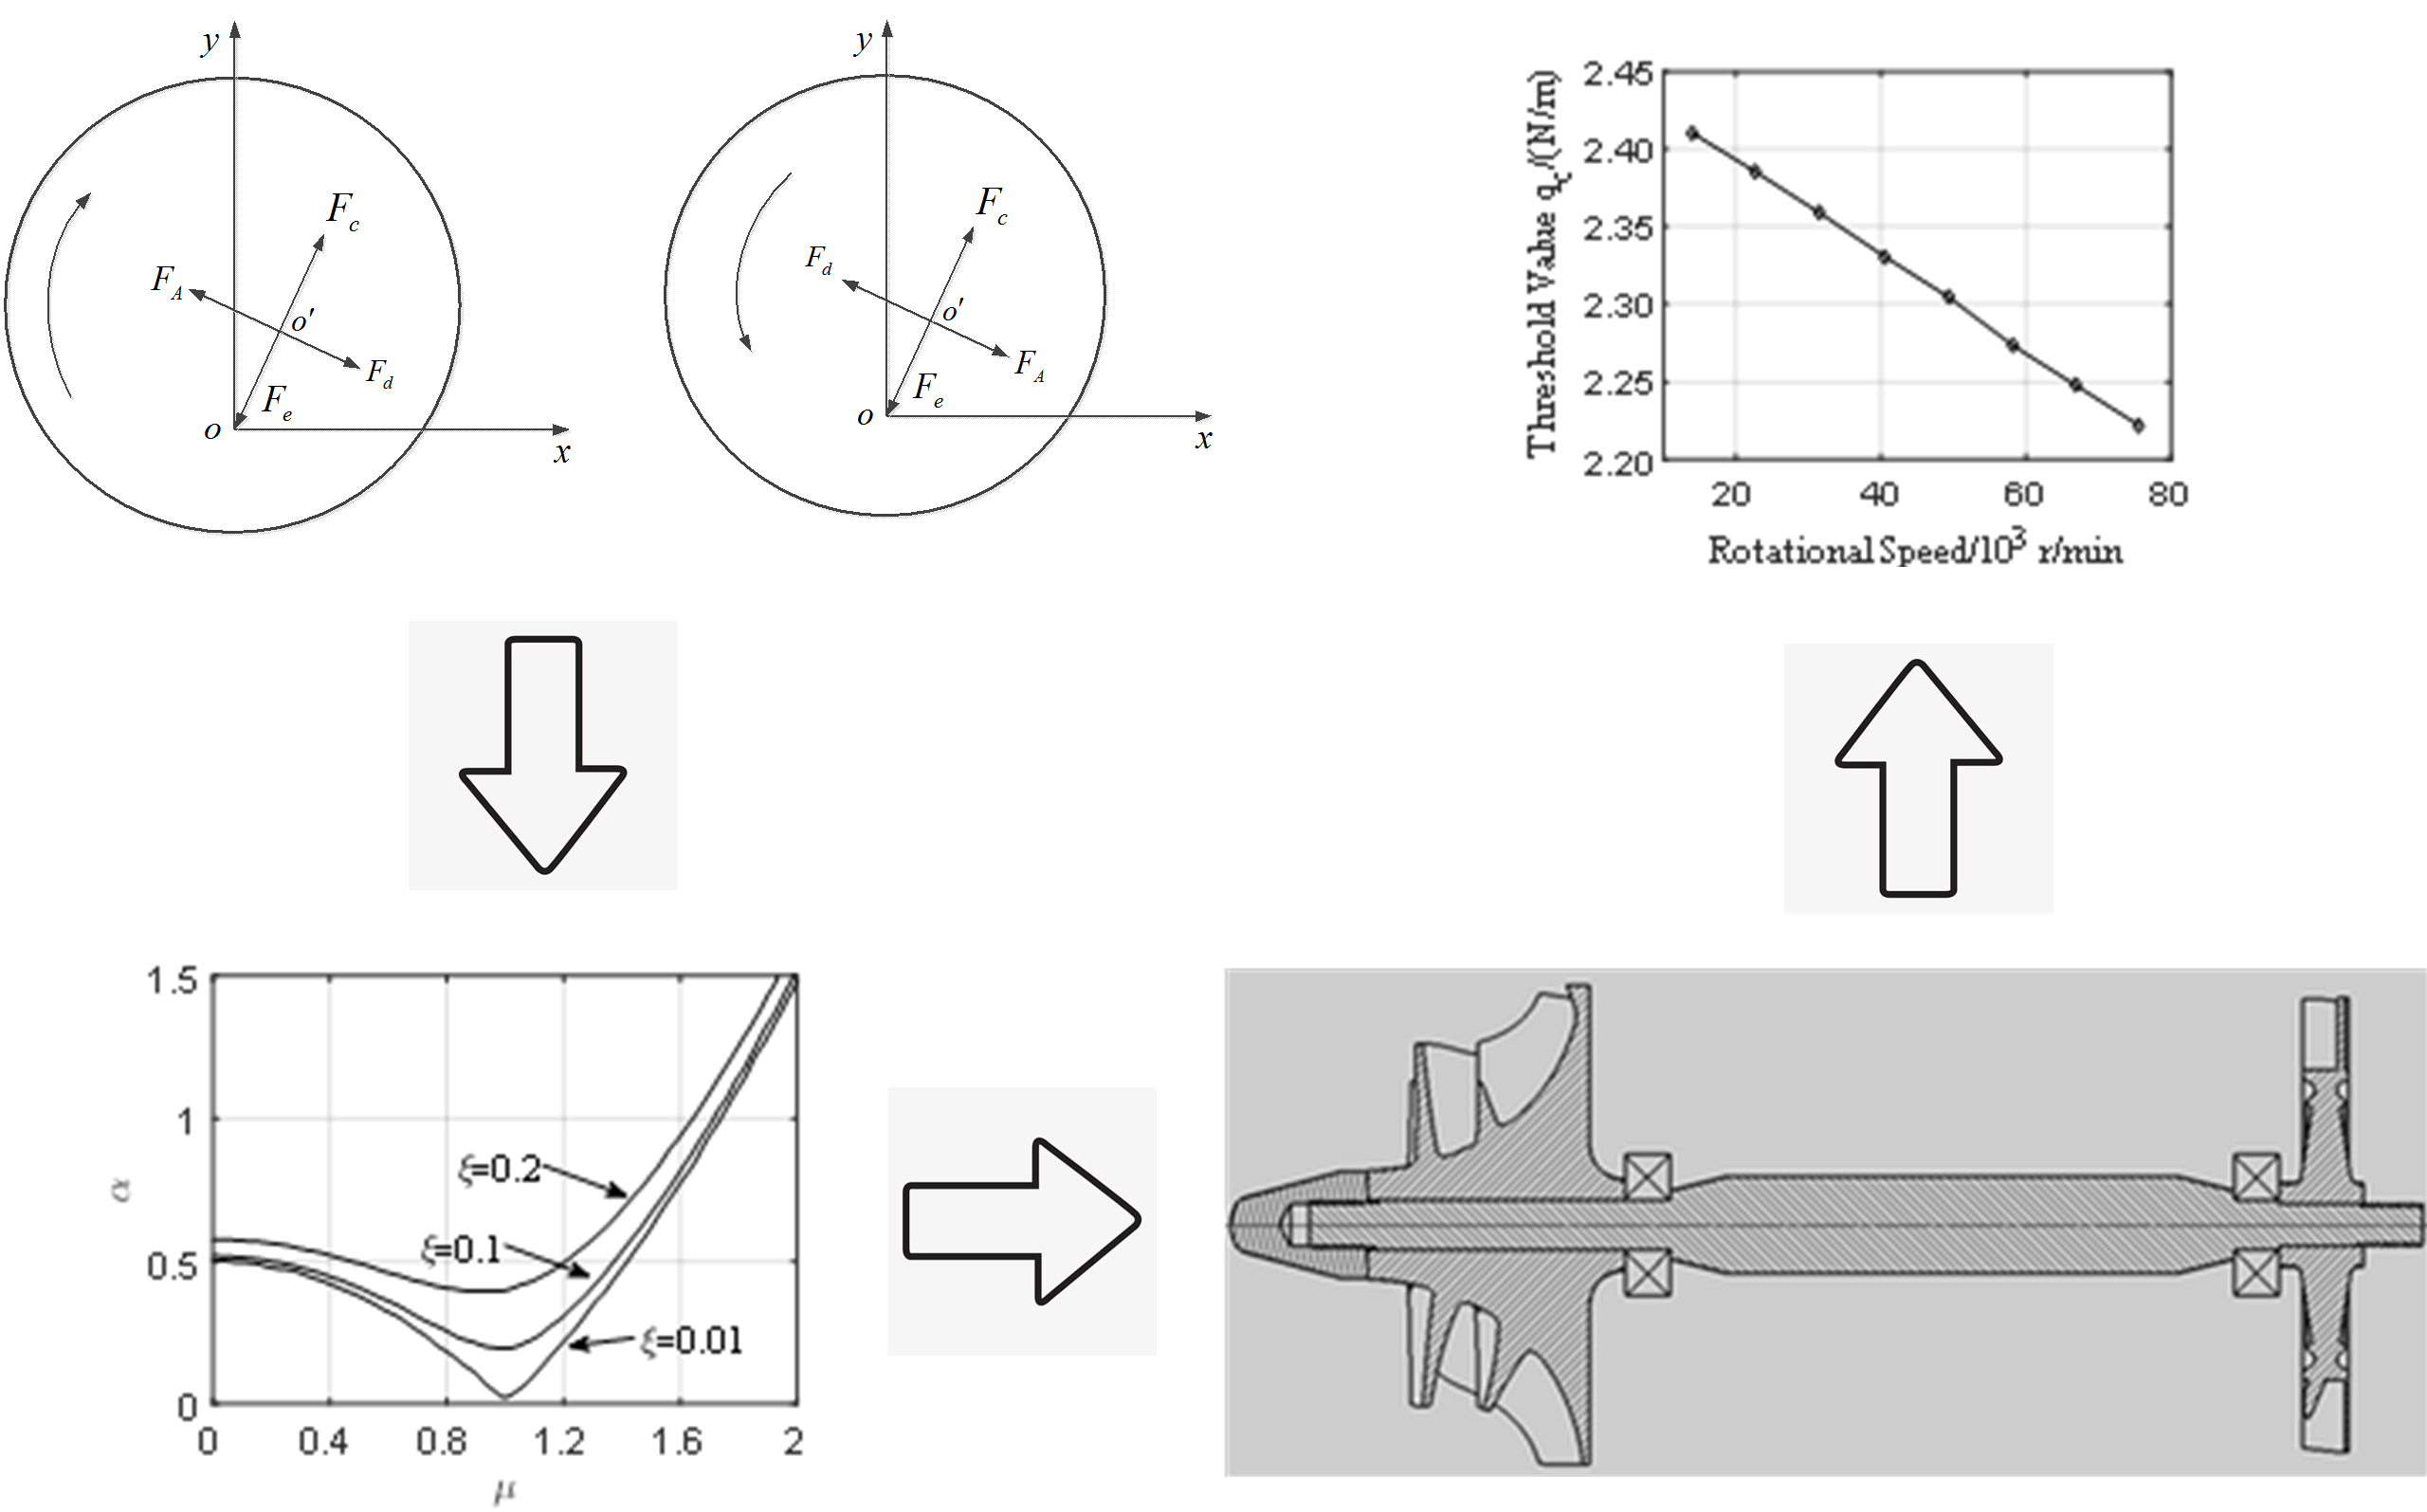 Instability threshold analysis and optimization of a rotor system considering the Alford force